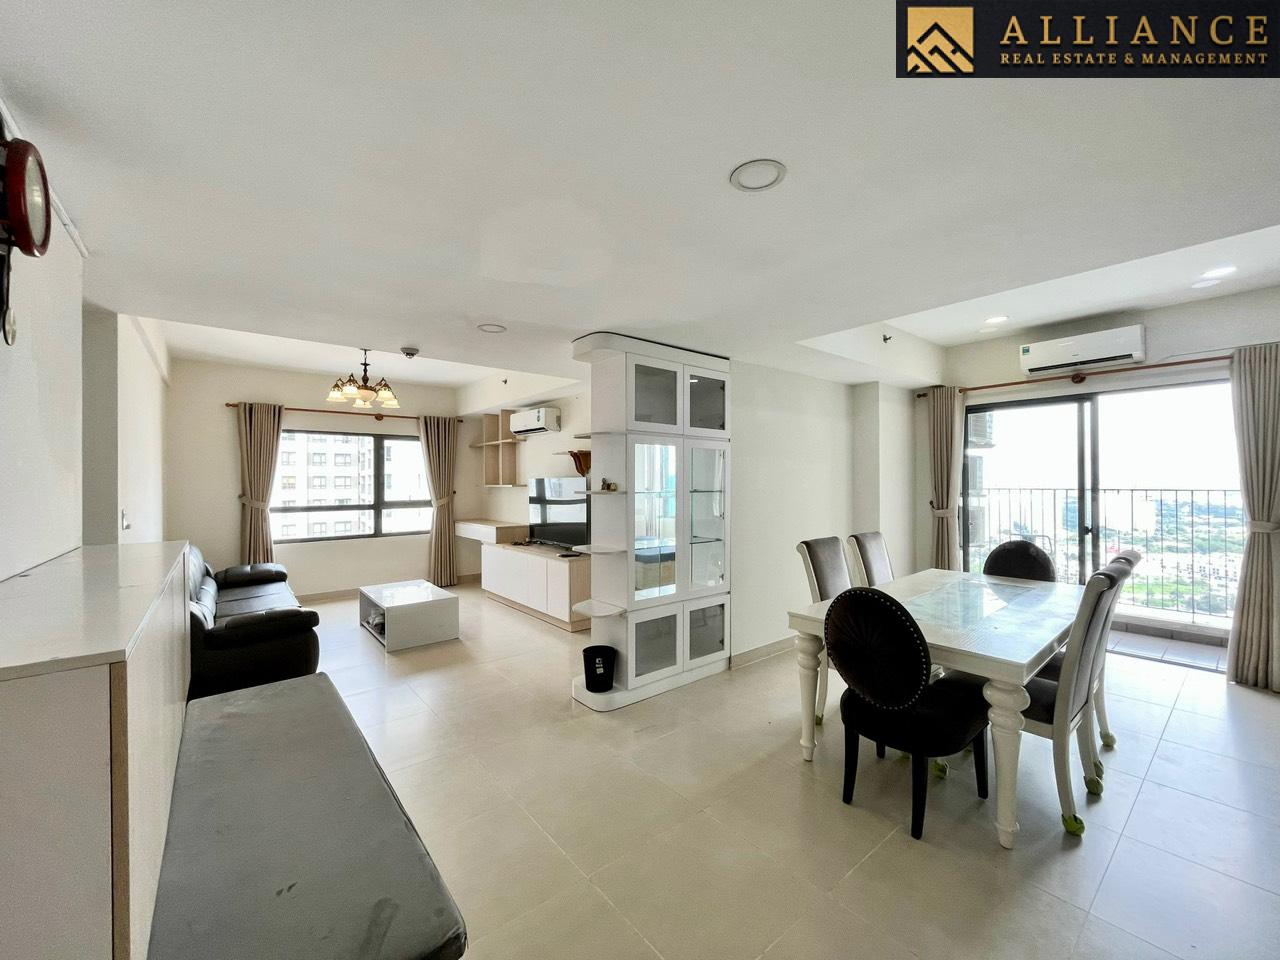 4 Bedroom Apartment (Masteri Thao Dien) for sale in Thao Dien Ward, Thu Duc city, HCM City.